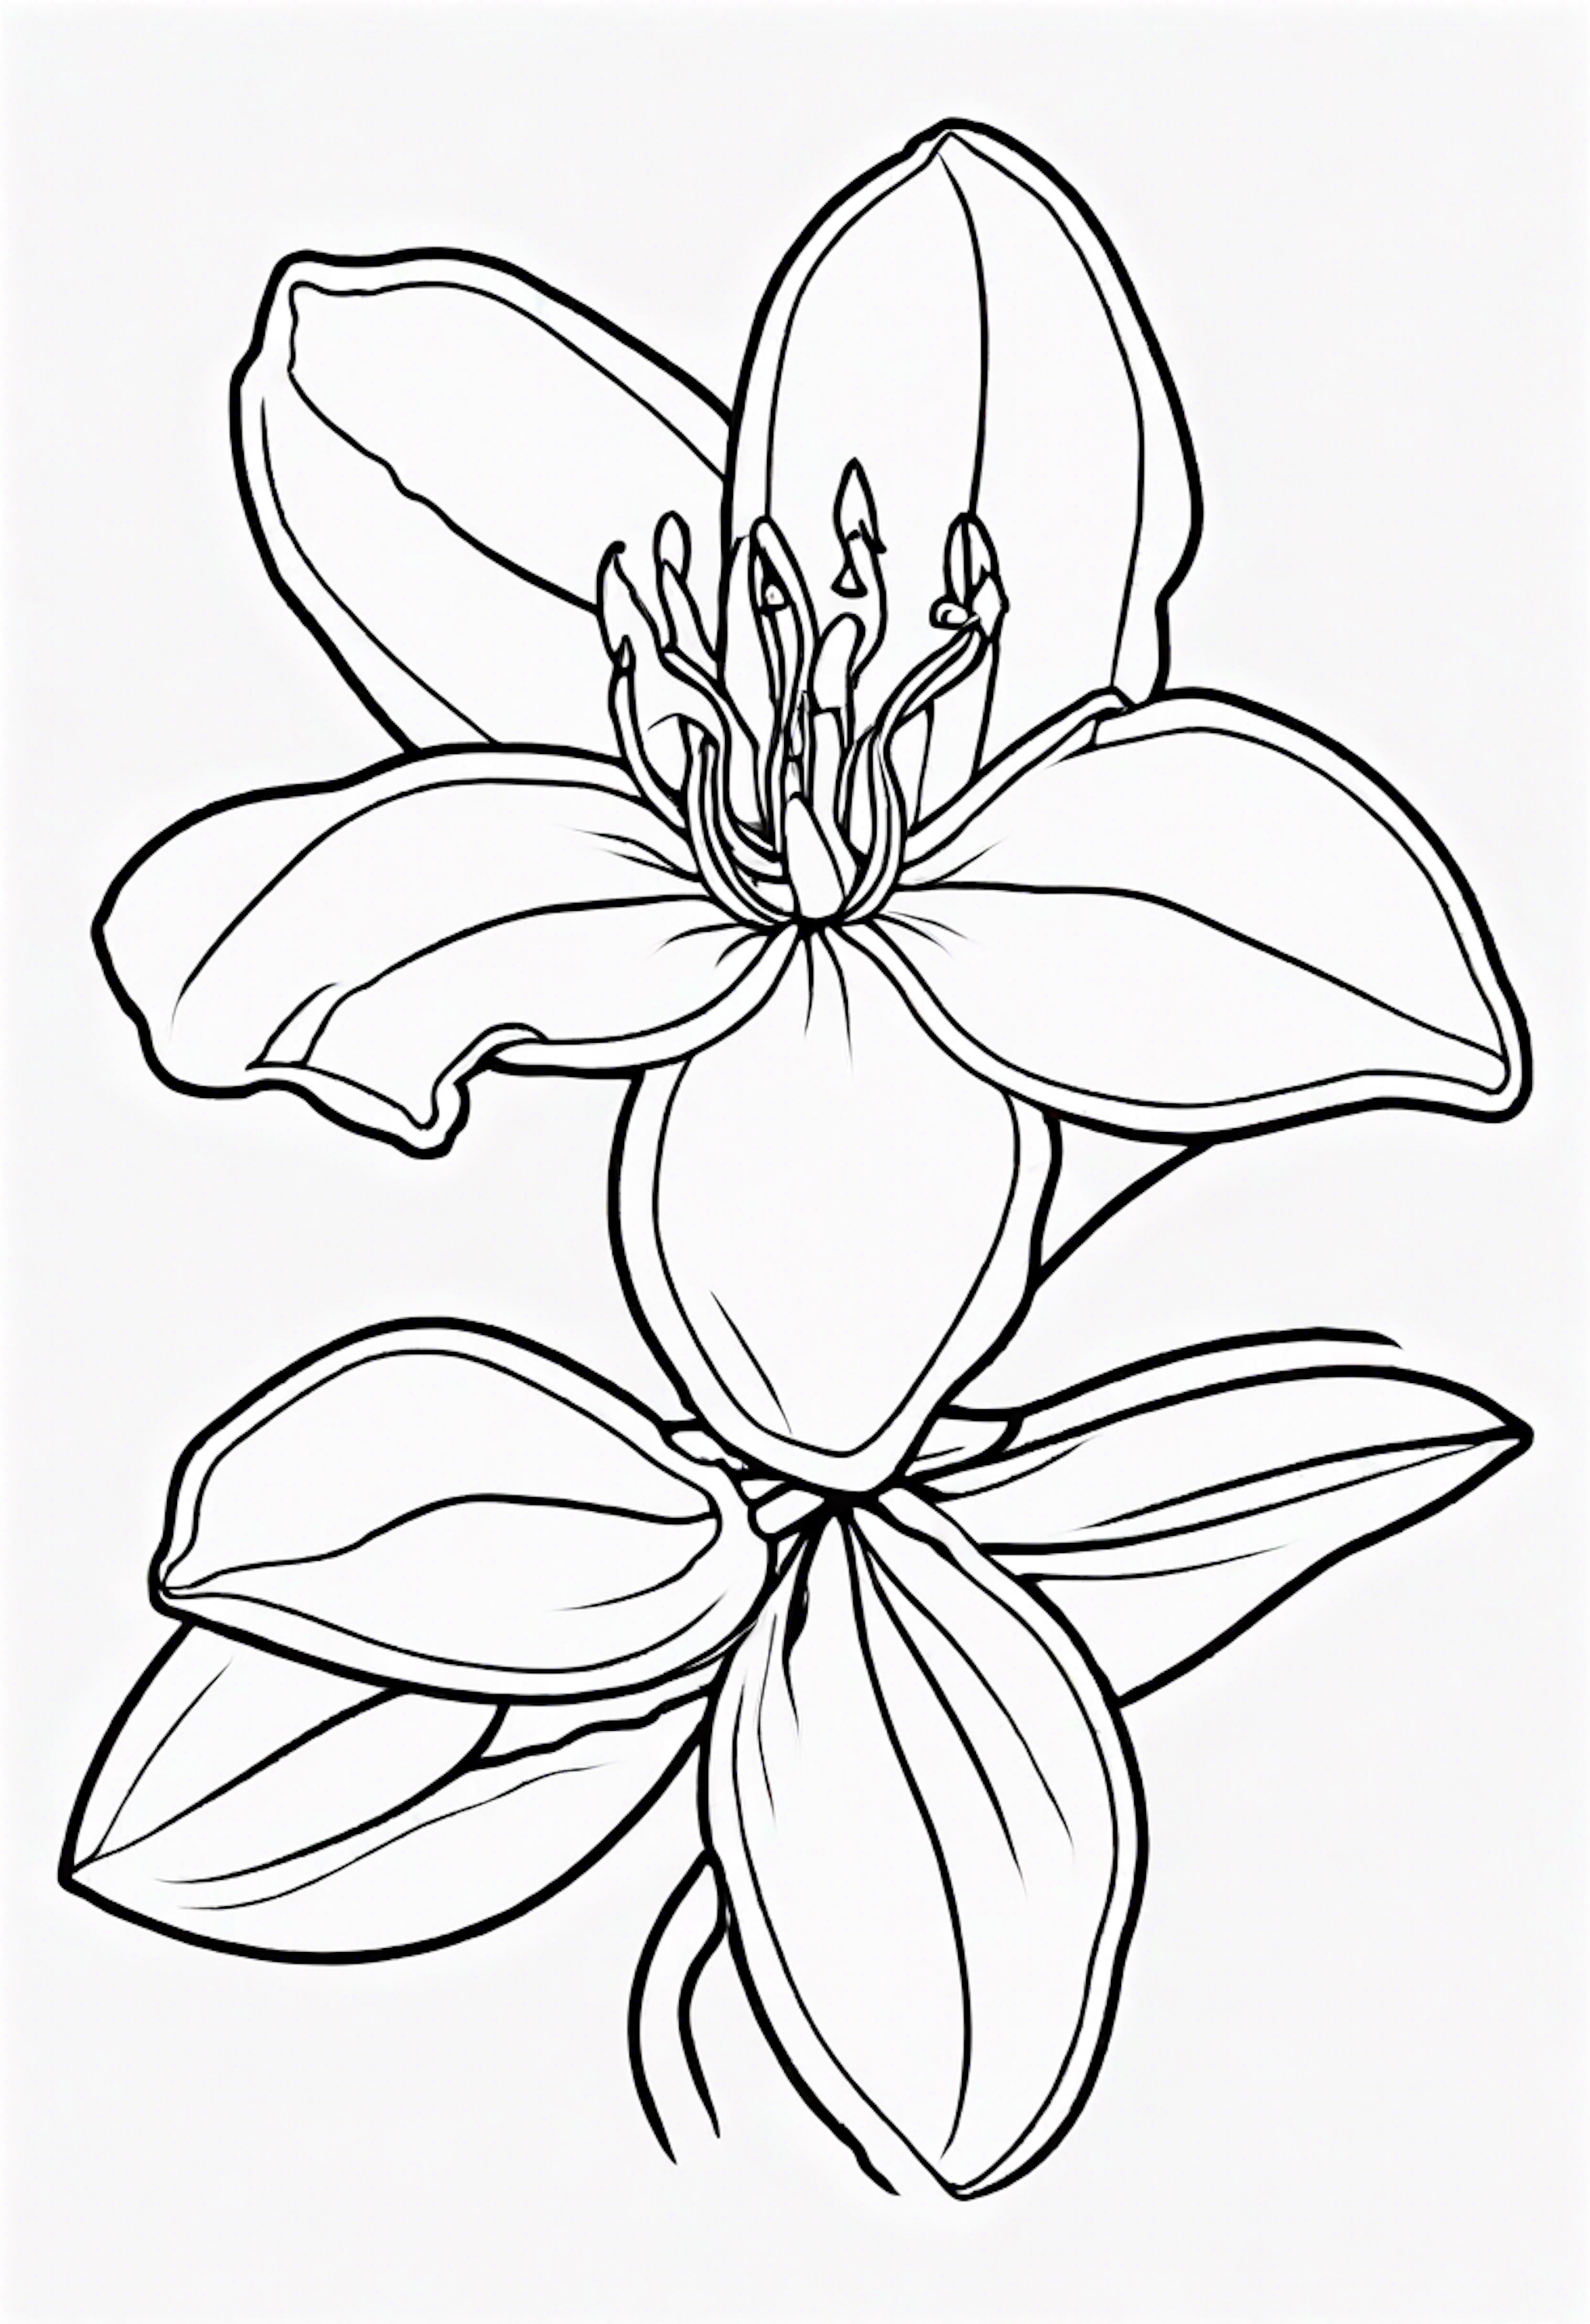 A coloring page for 1 Jasmine coloring pages